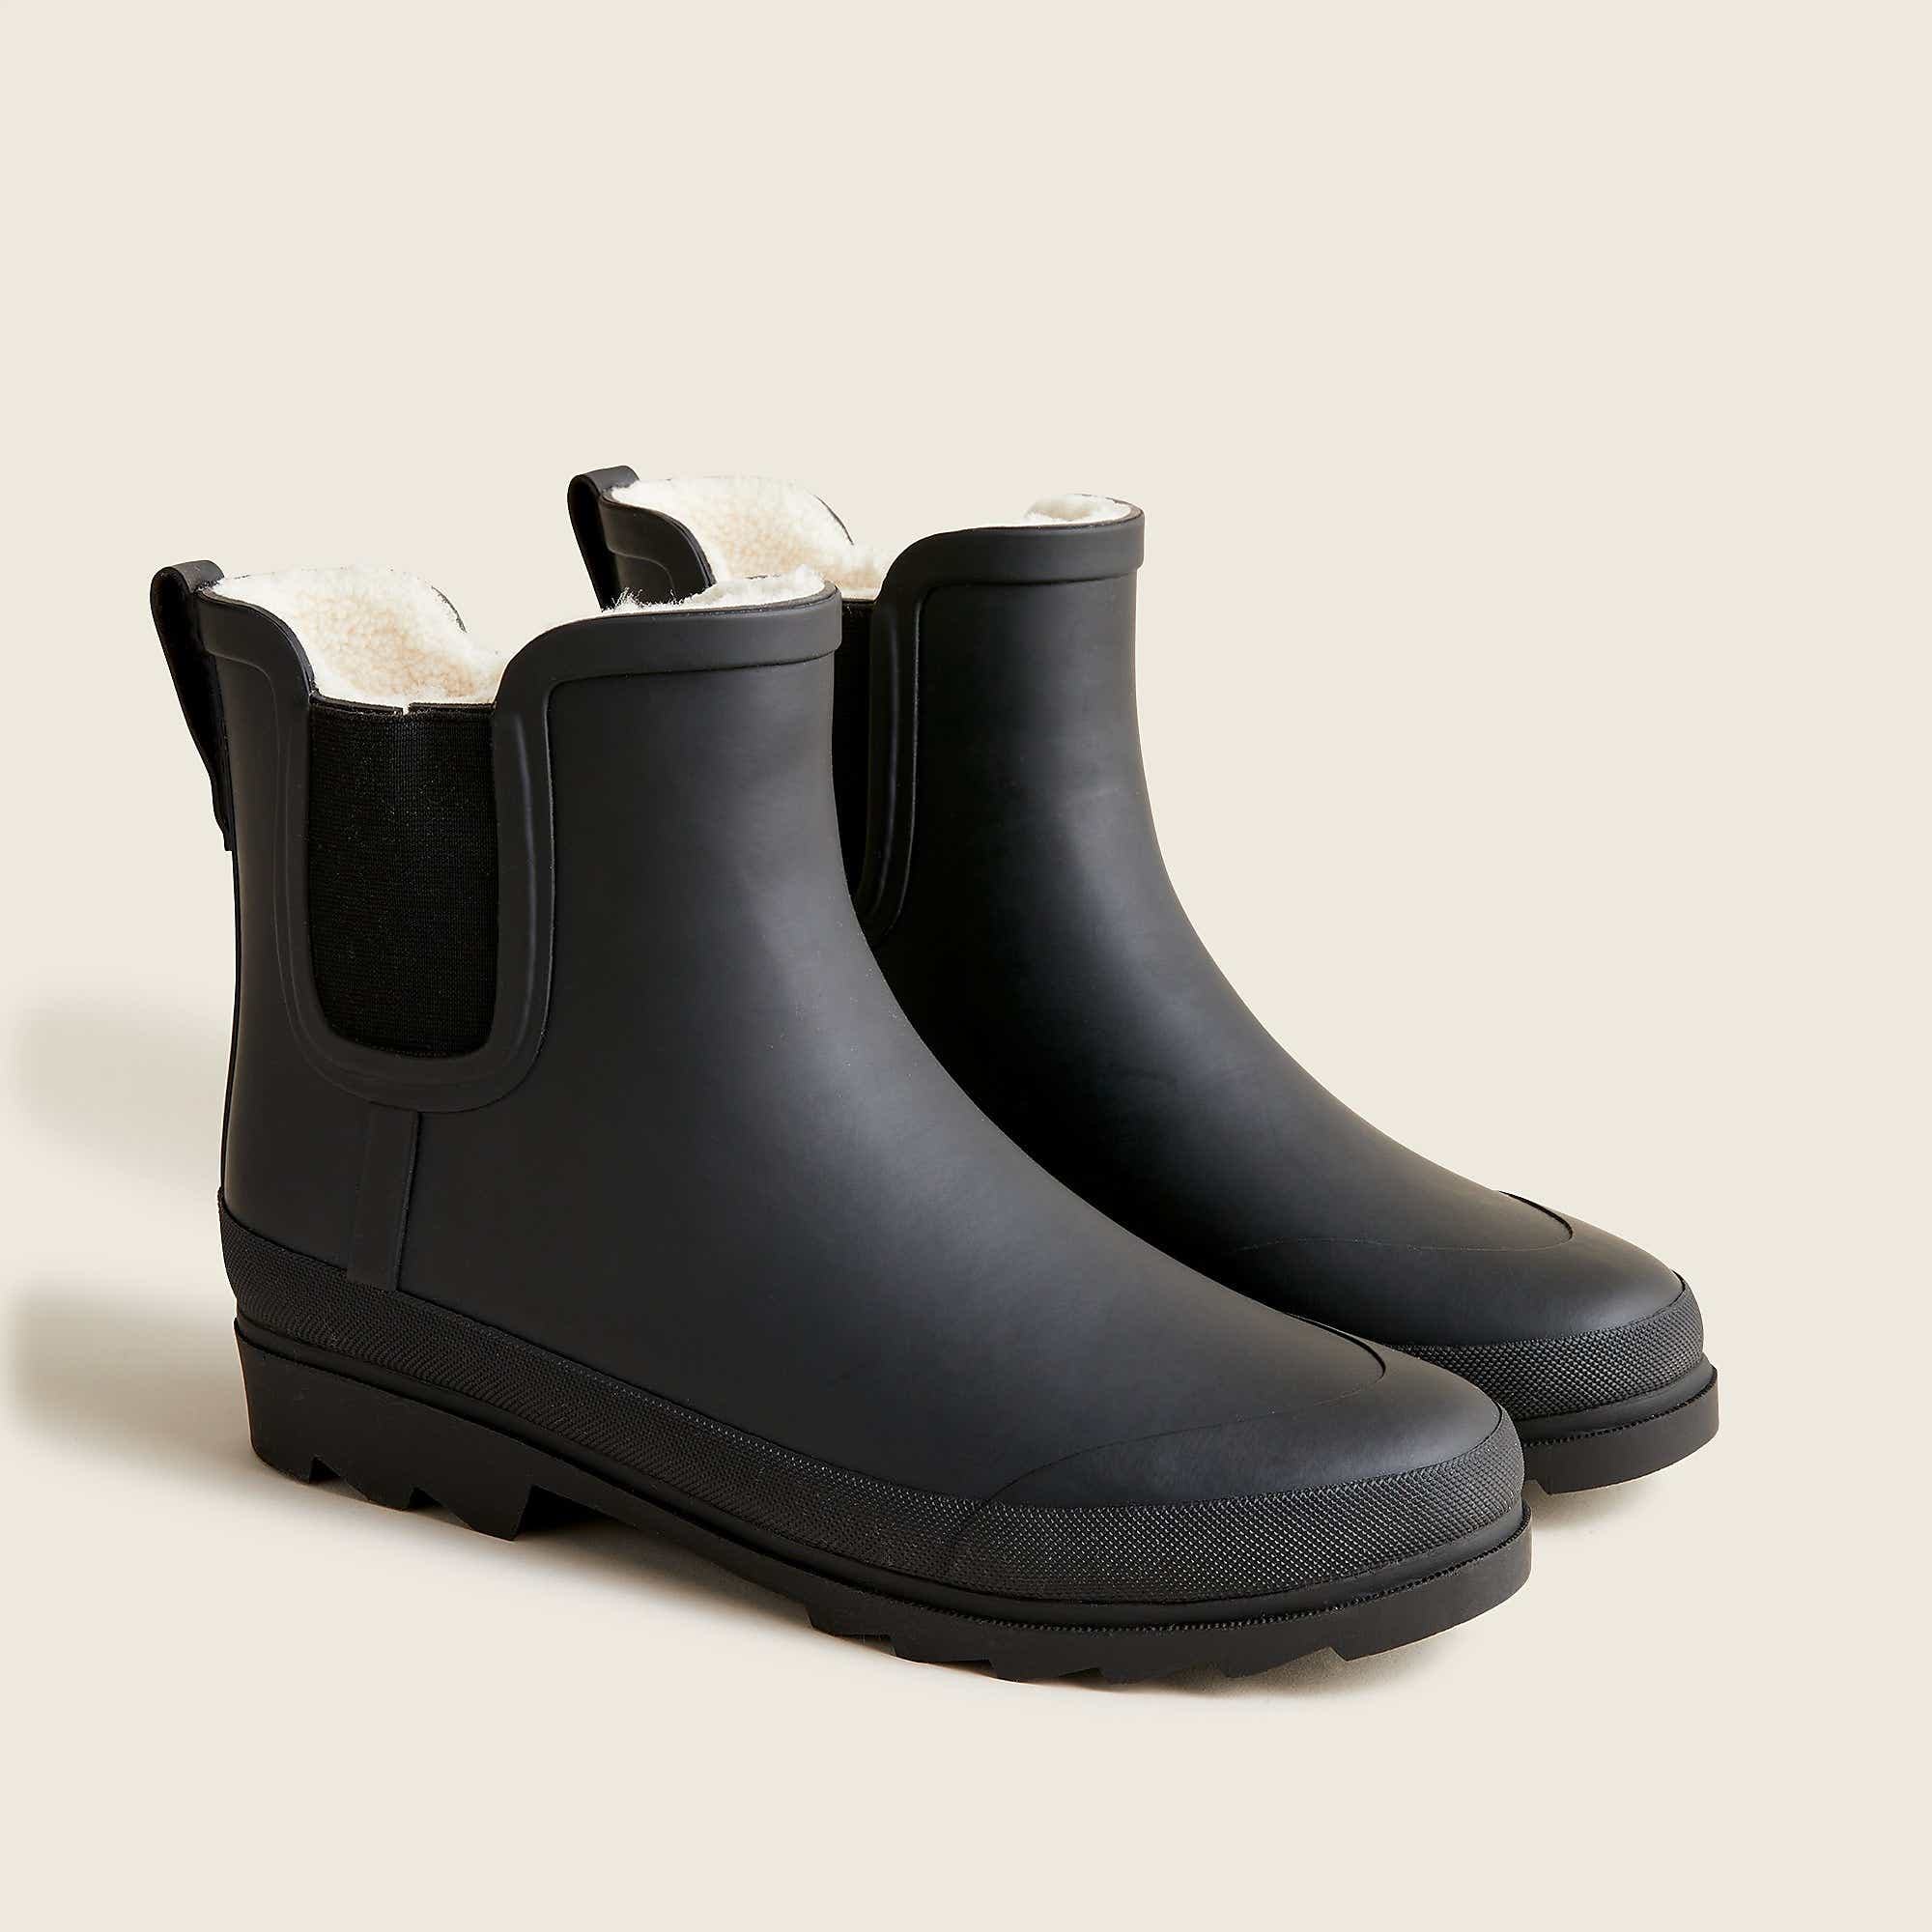 vlack Sherpa-Lined Chelsea Rain Boots by J.Crew